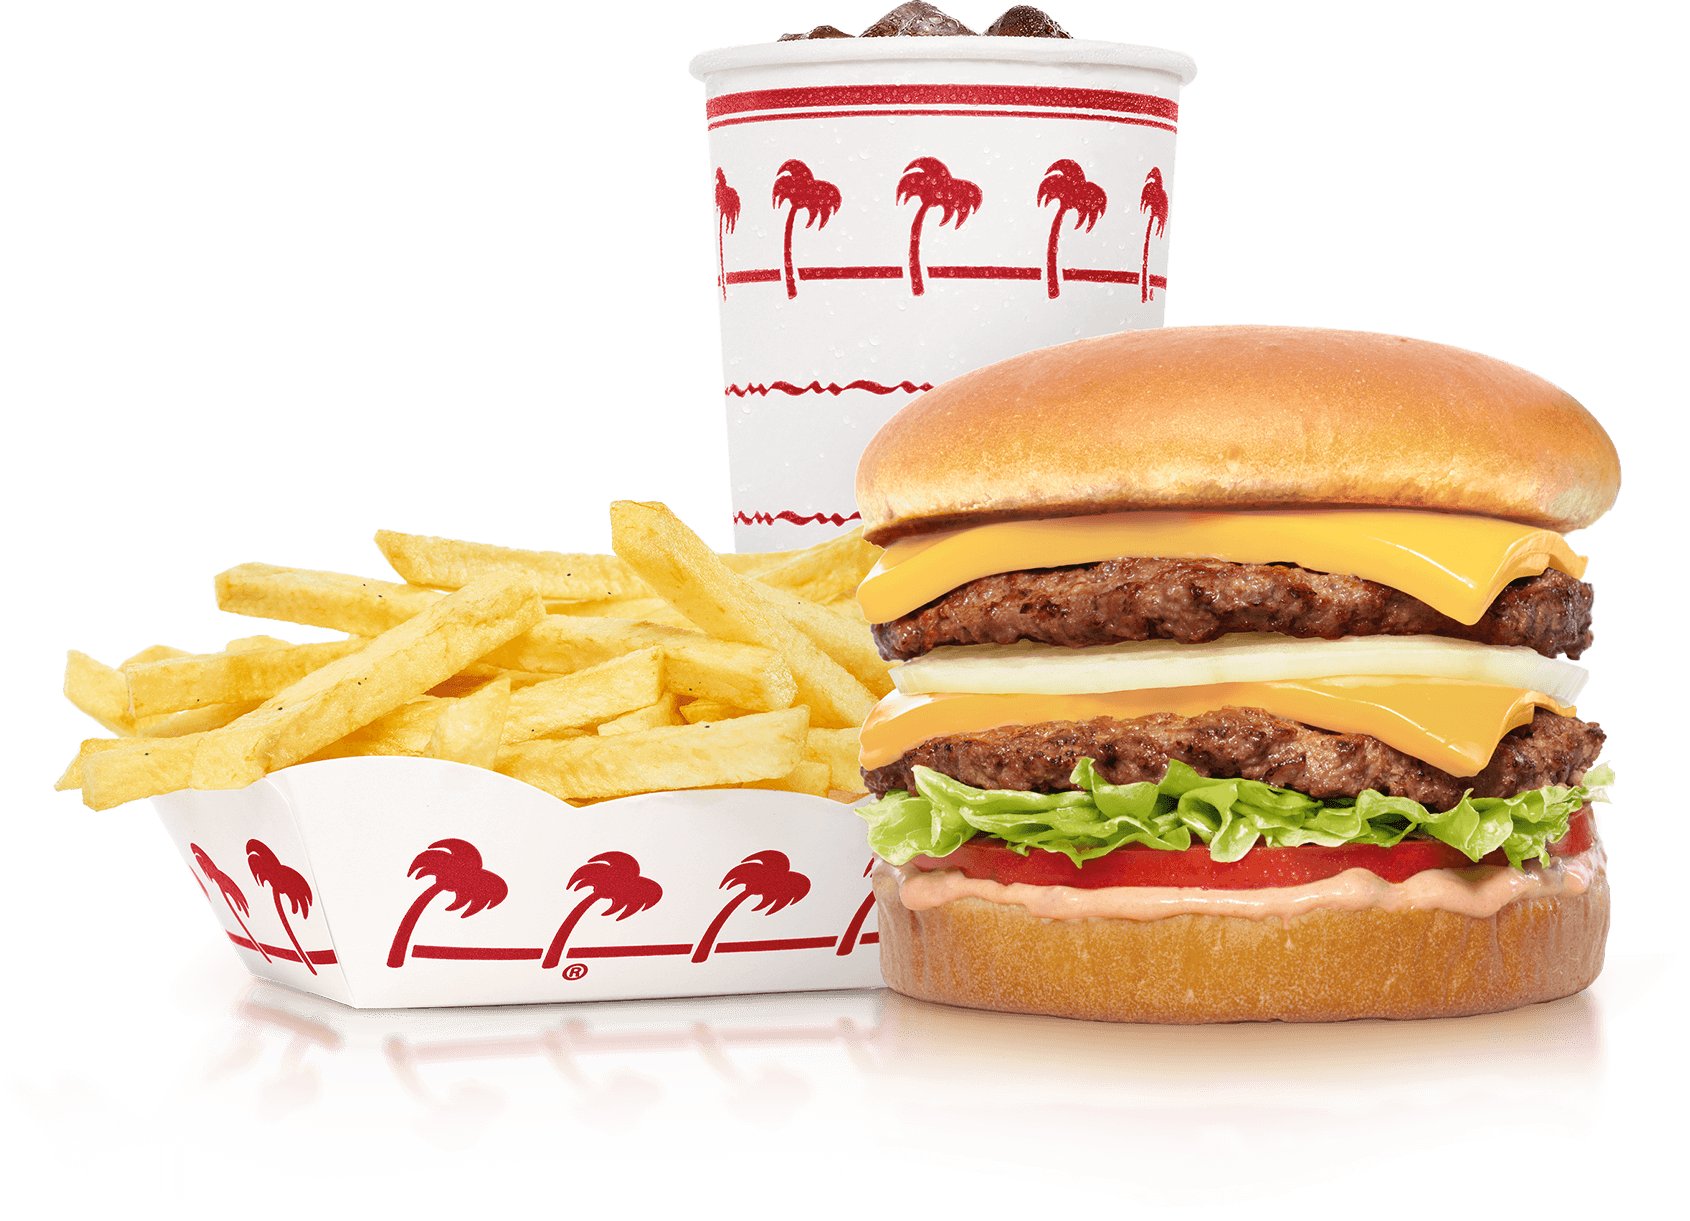 In N Out Menu Prices 100% Authentic, Save 60% | jlcatj.gob.mx